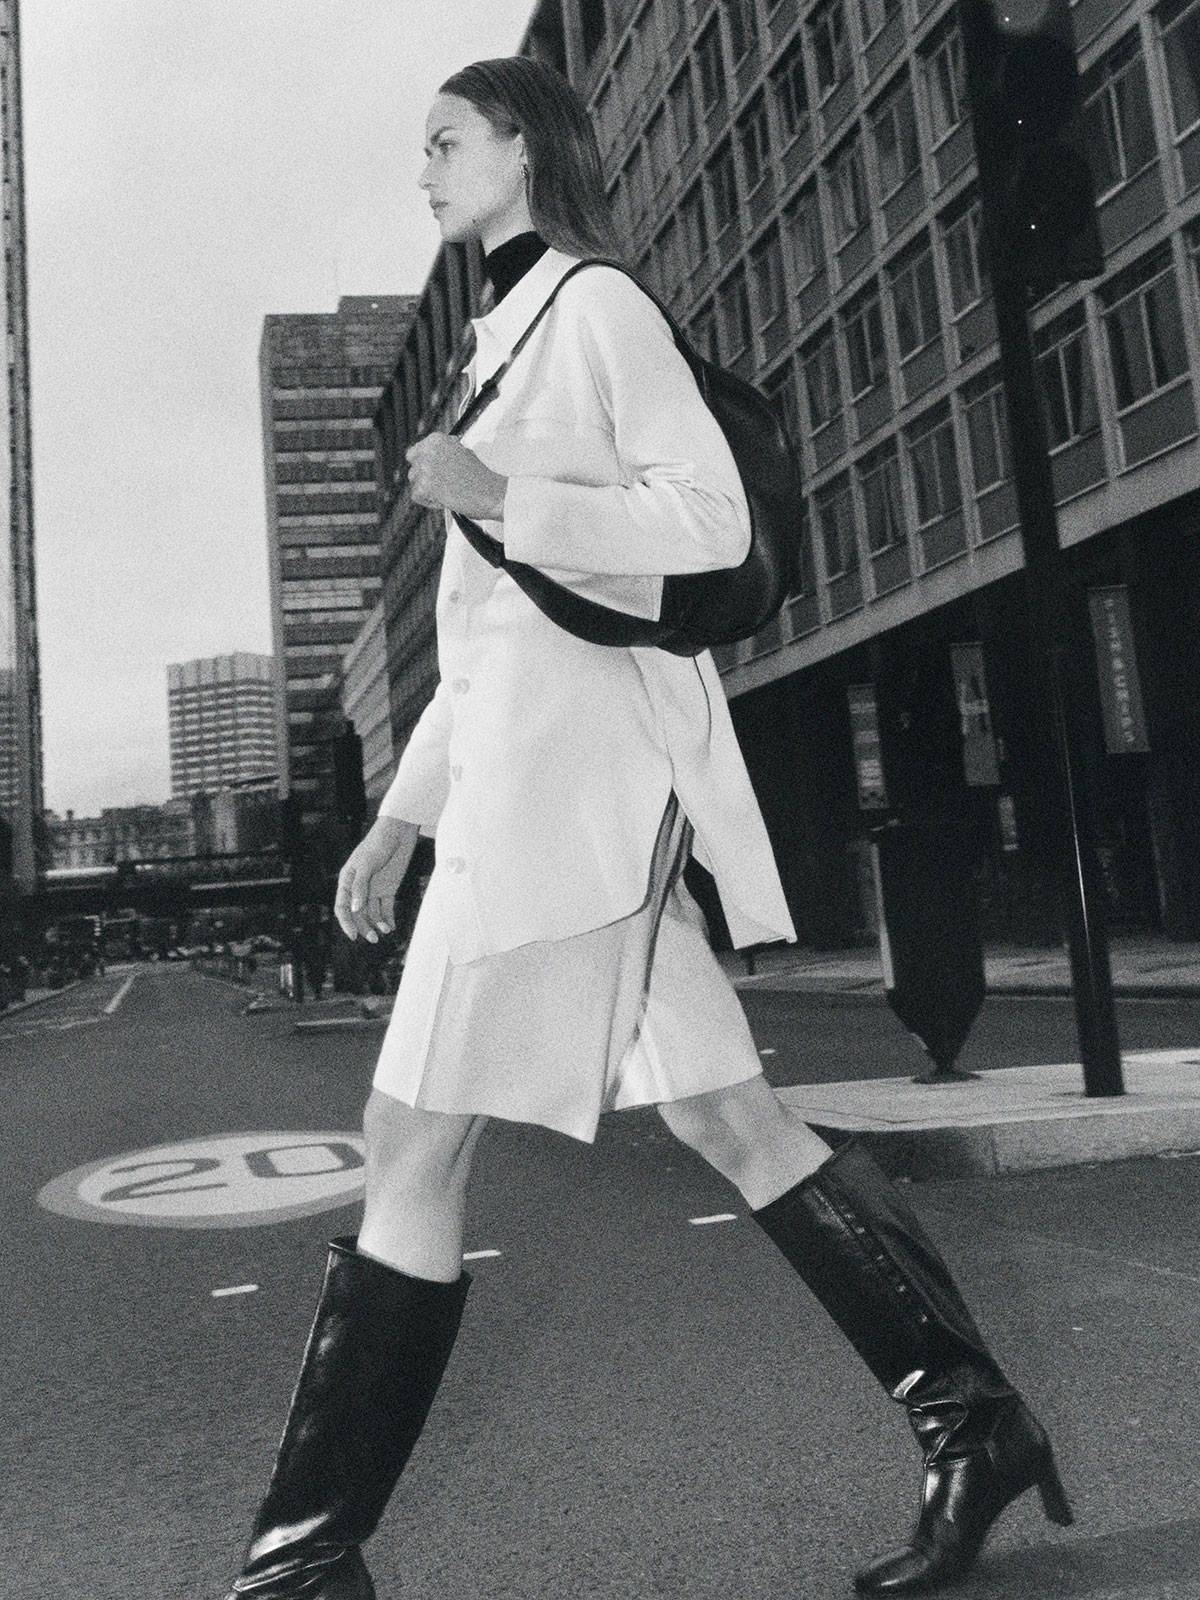 COS Black KNEE HIGH HEELED LEATHER BOOTS / COS Beige KNITTED TUNIC SHIRT / COS Off-White WIDE-LEG KNITTED SHORTS / COS Black RIBBED MOCK NECK TOP. Model: Birgit Kos. Photographer: Daniel Shea. Stylist: Clare Richardson. Hair Stylist: Yumi Nakada-Dingle. Makeup Artist: Niamh Quinn. Art Director: Andy Knappett